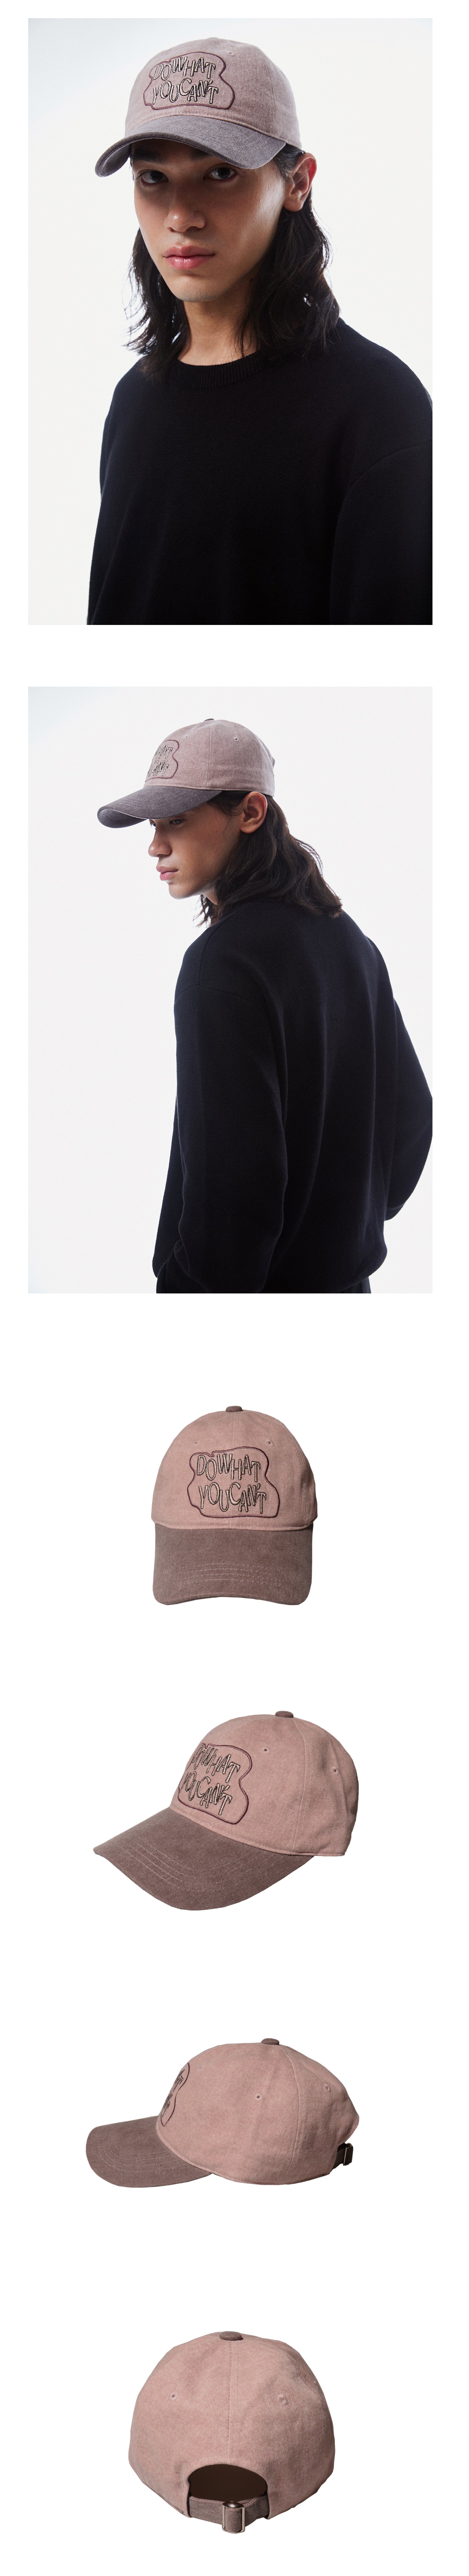 DO WHAT YOU CANT DARK PINK/BROWN BALL CAP